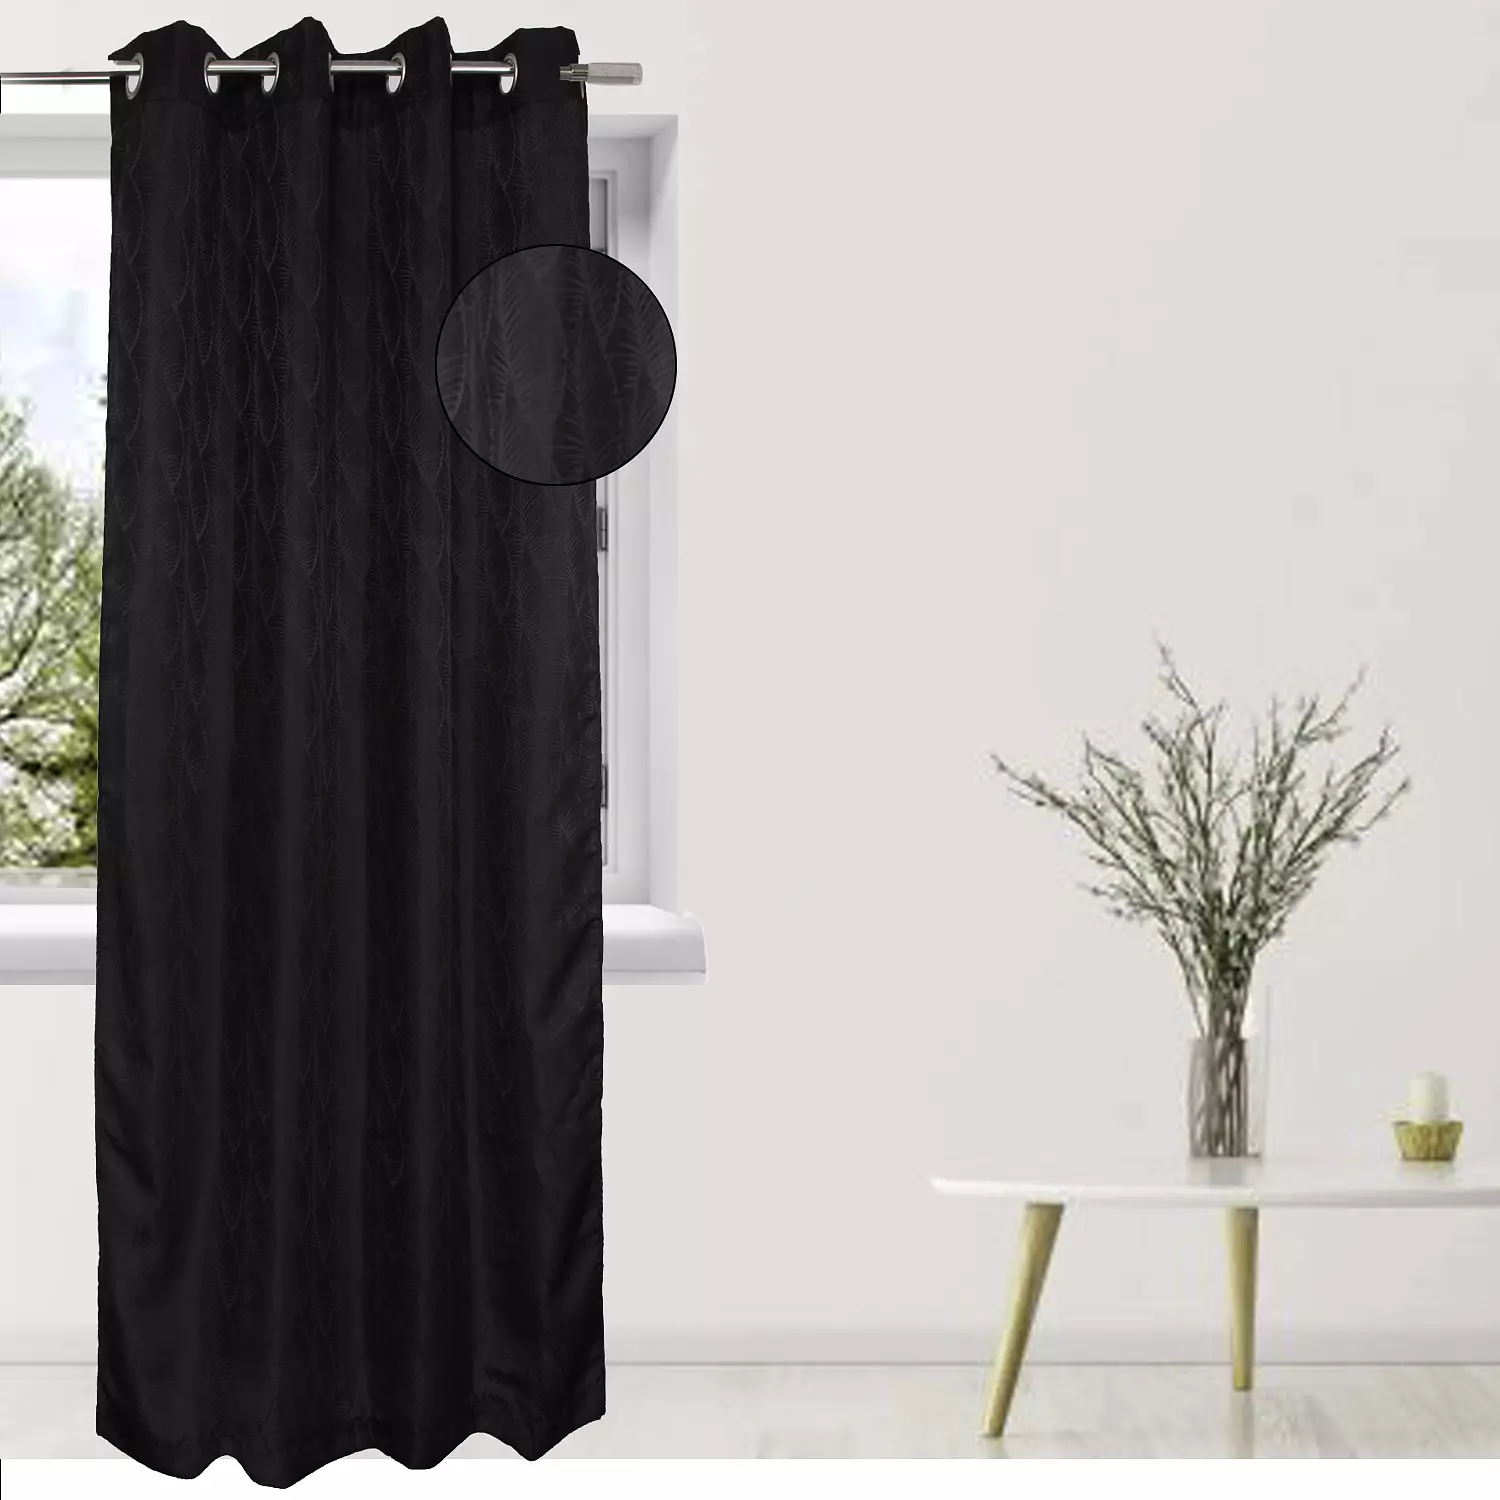 Amberly, jacquard curtain with metal grommets, 54"x84", black